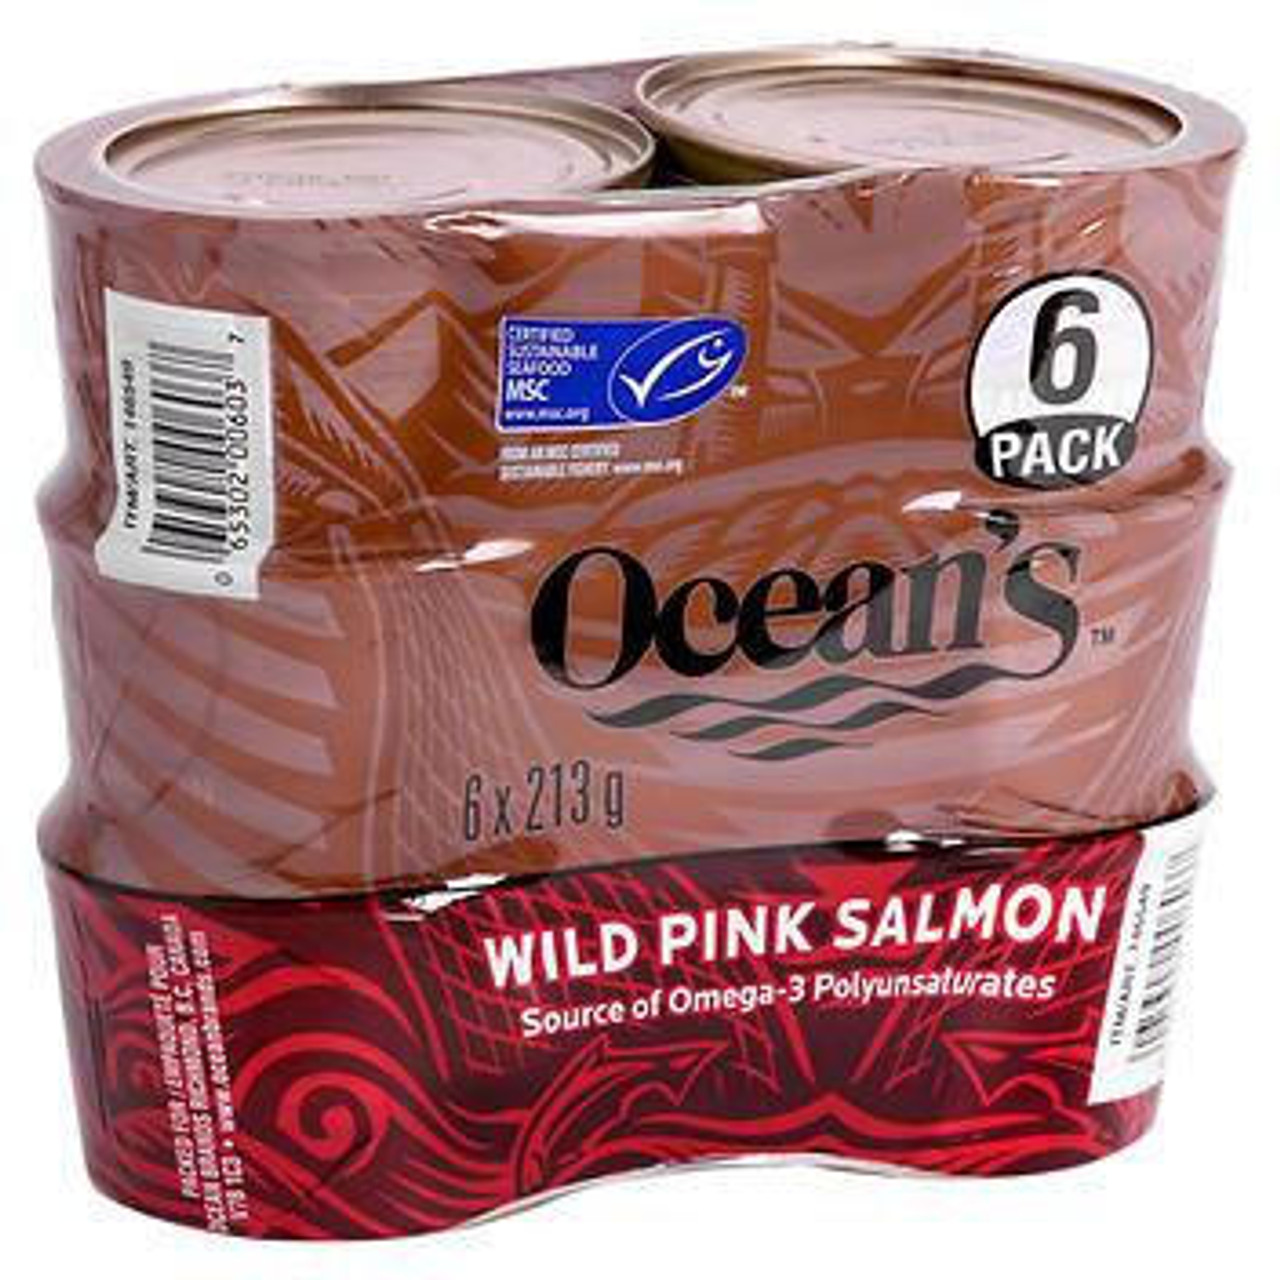 Ocean's Wild Pink Salmon, 6 x 213 g - Delightful and Nutrient-Rich Seafood- Chicken Pieces